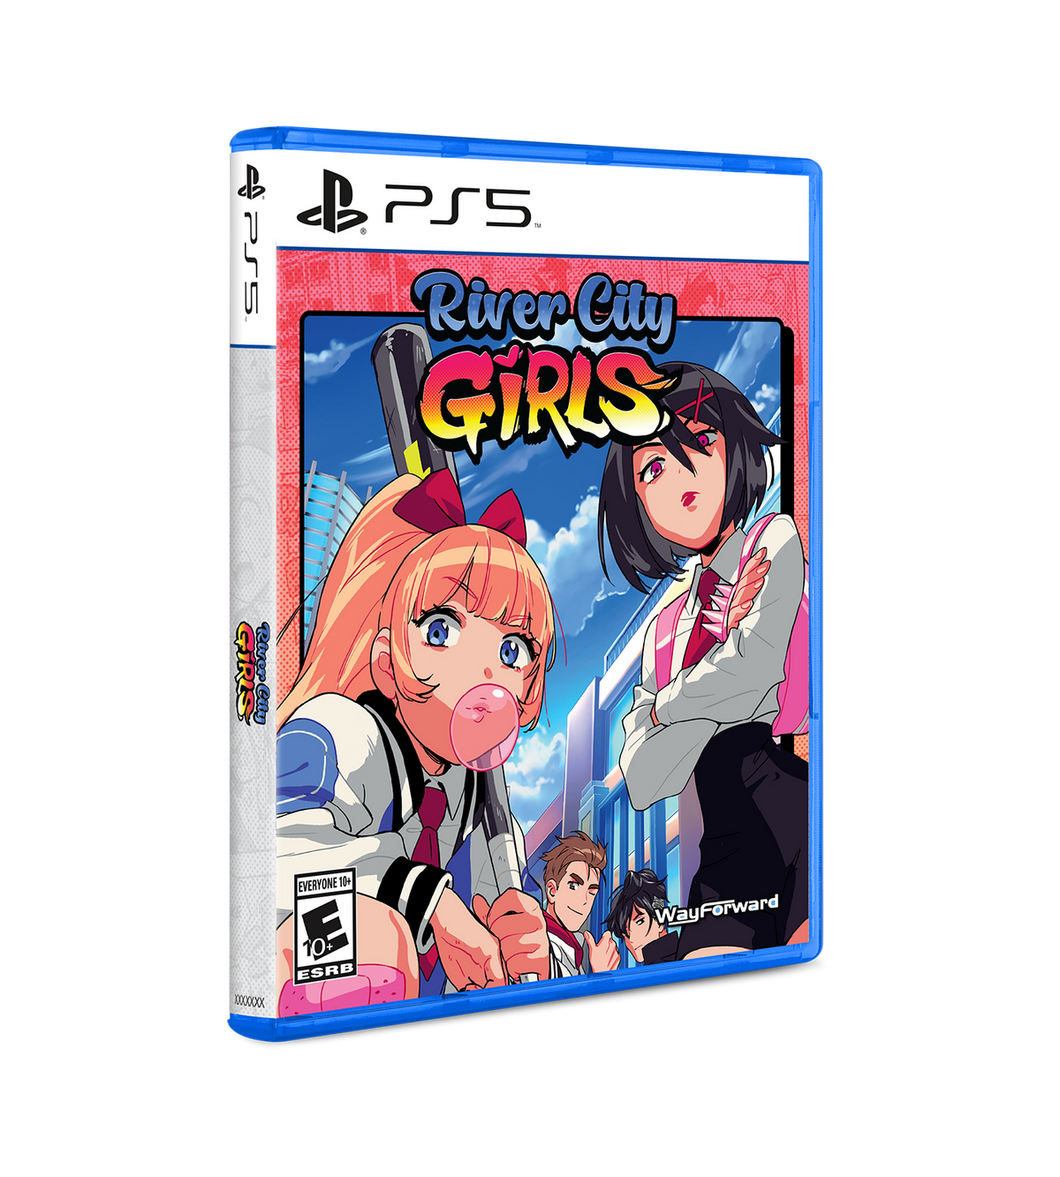 River city girls / Limited run games / PS5